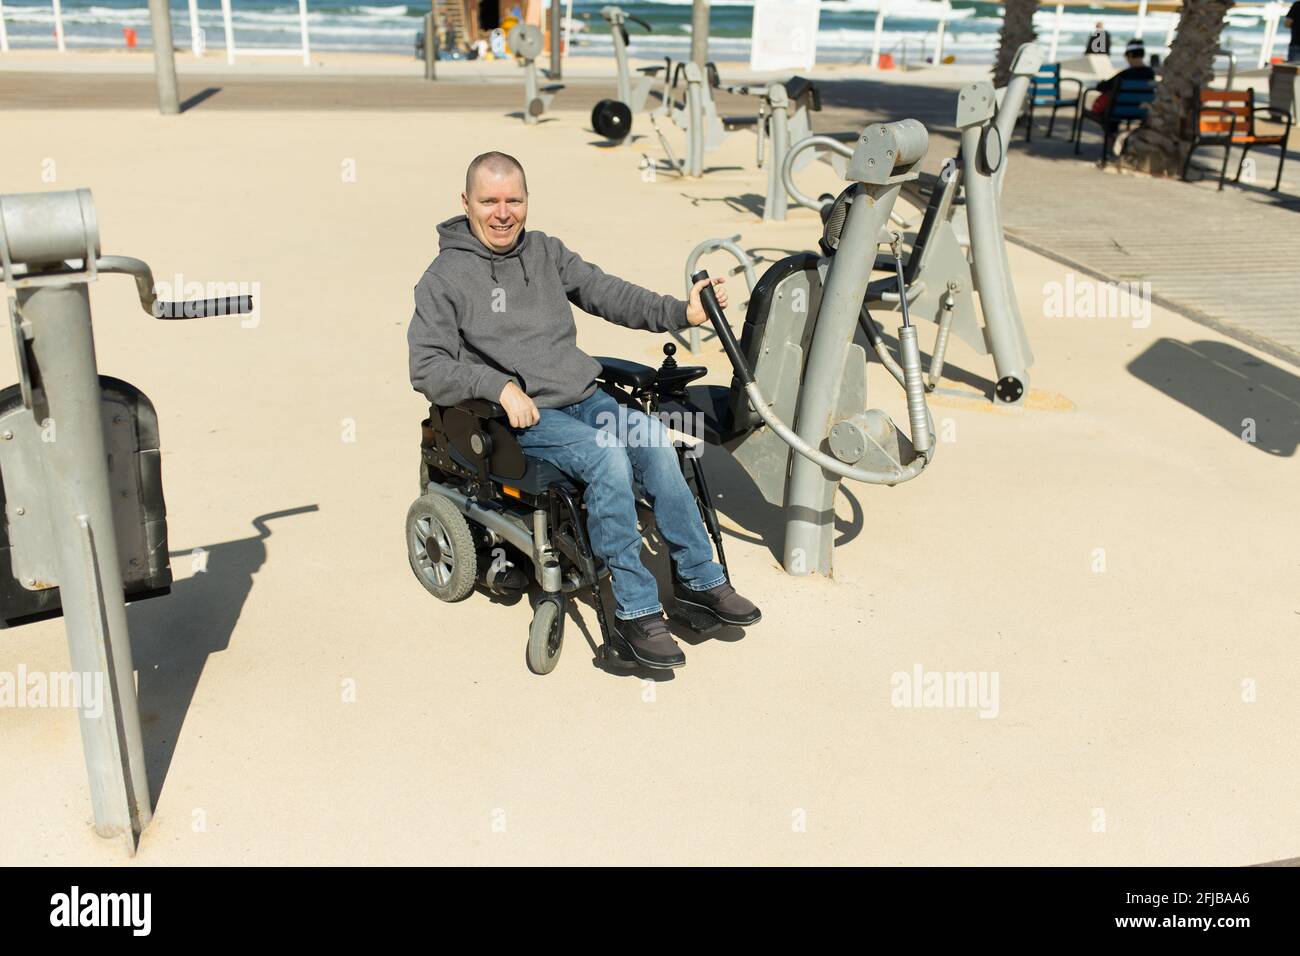 Disabled man in wheelchair working out sport Stock Photo